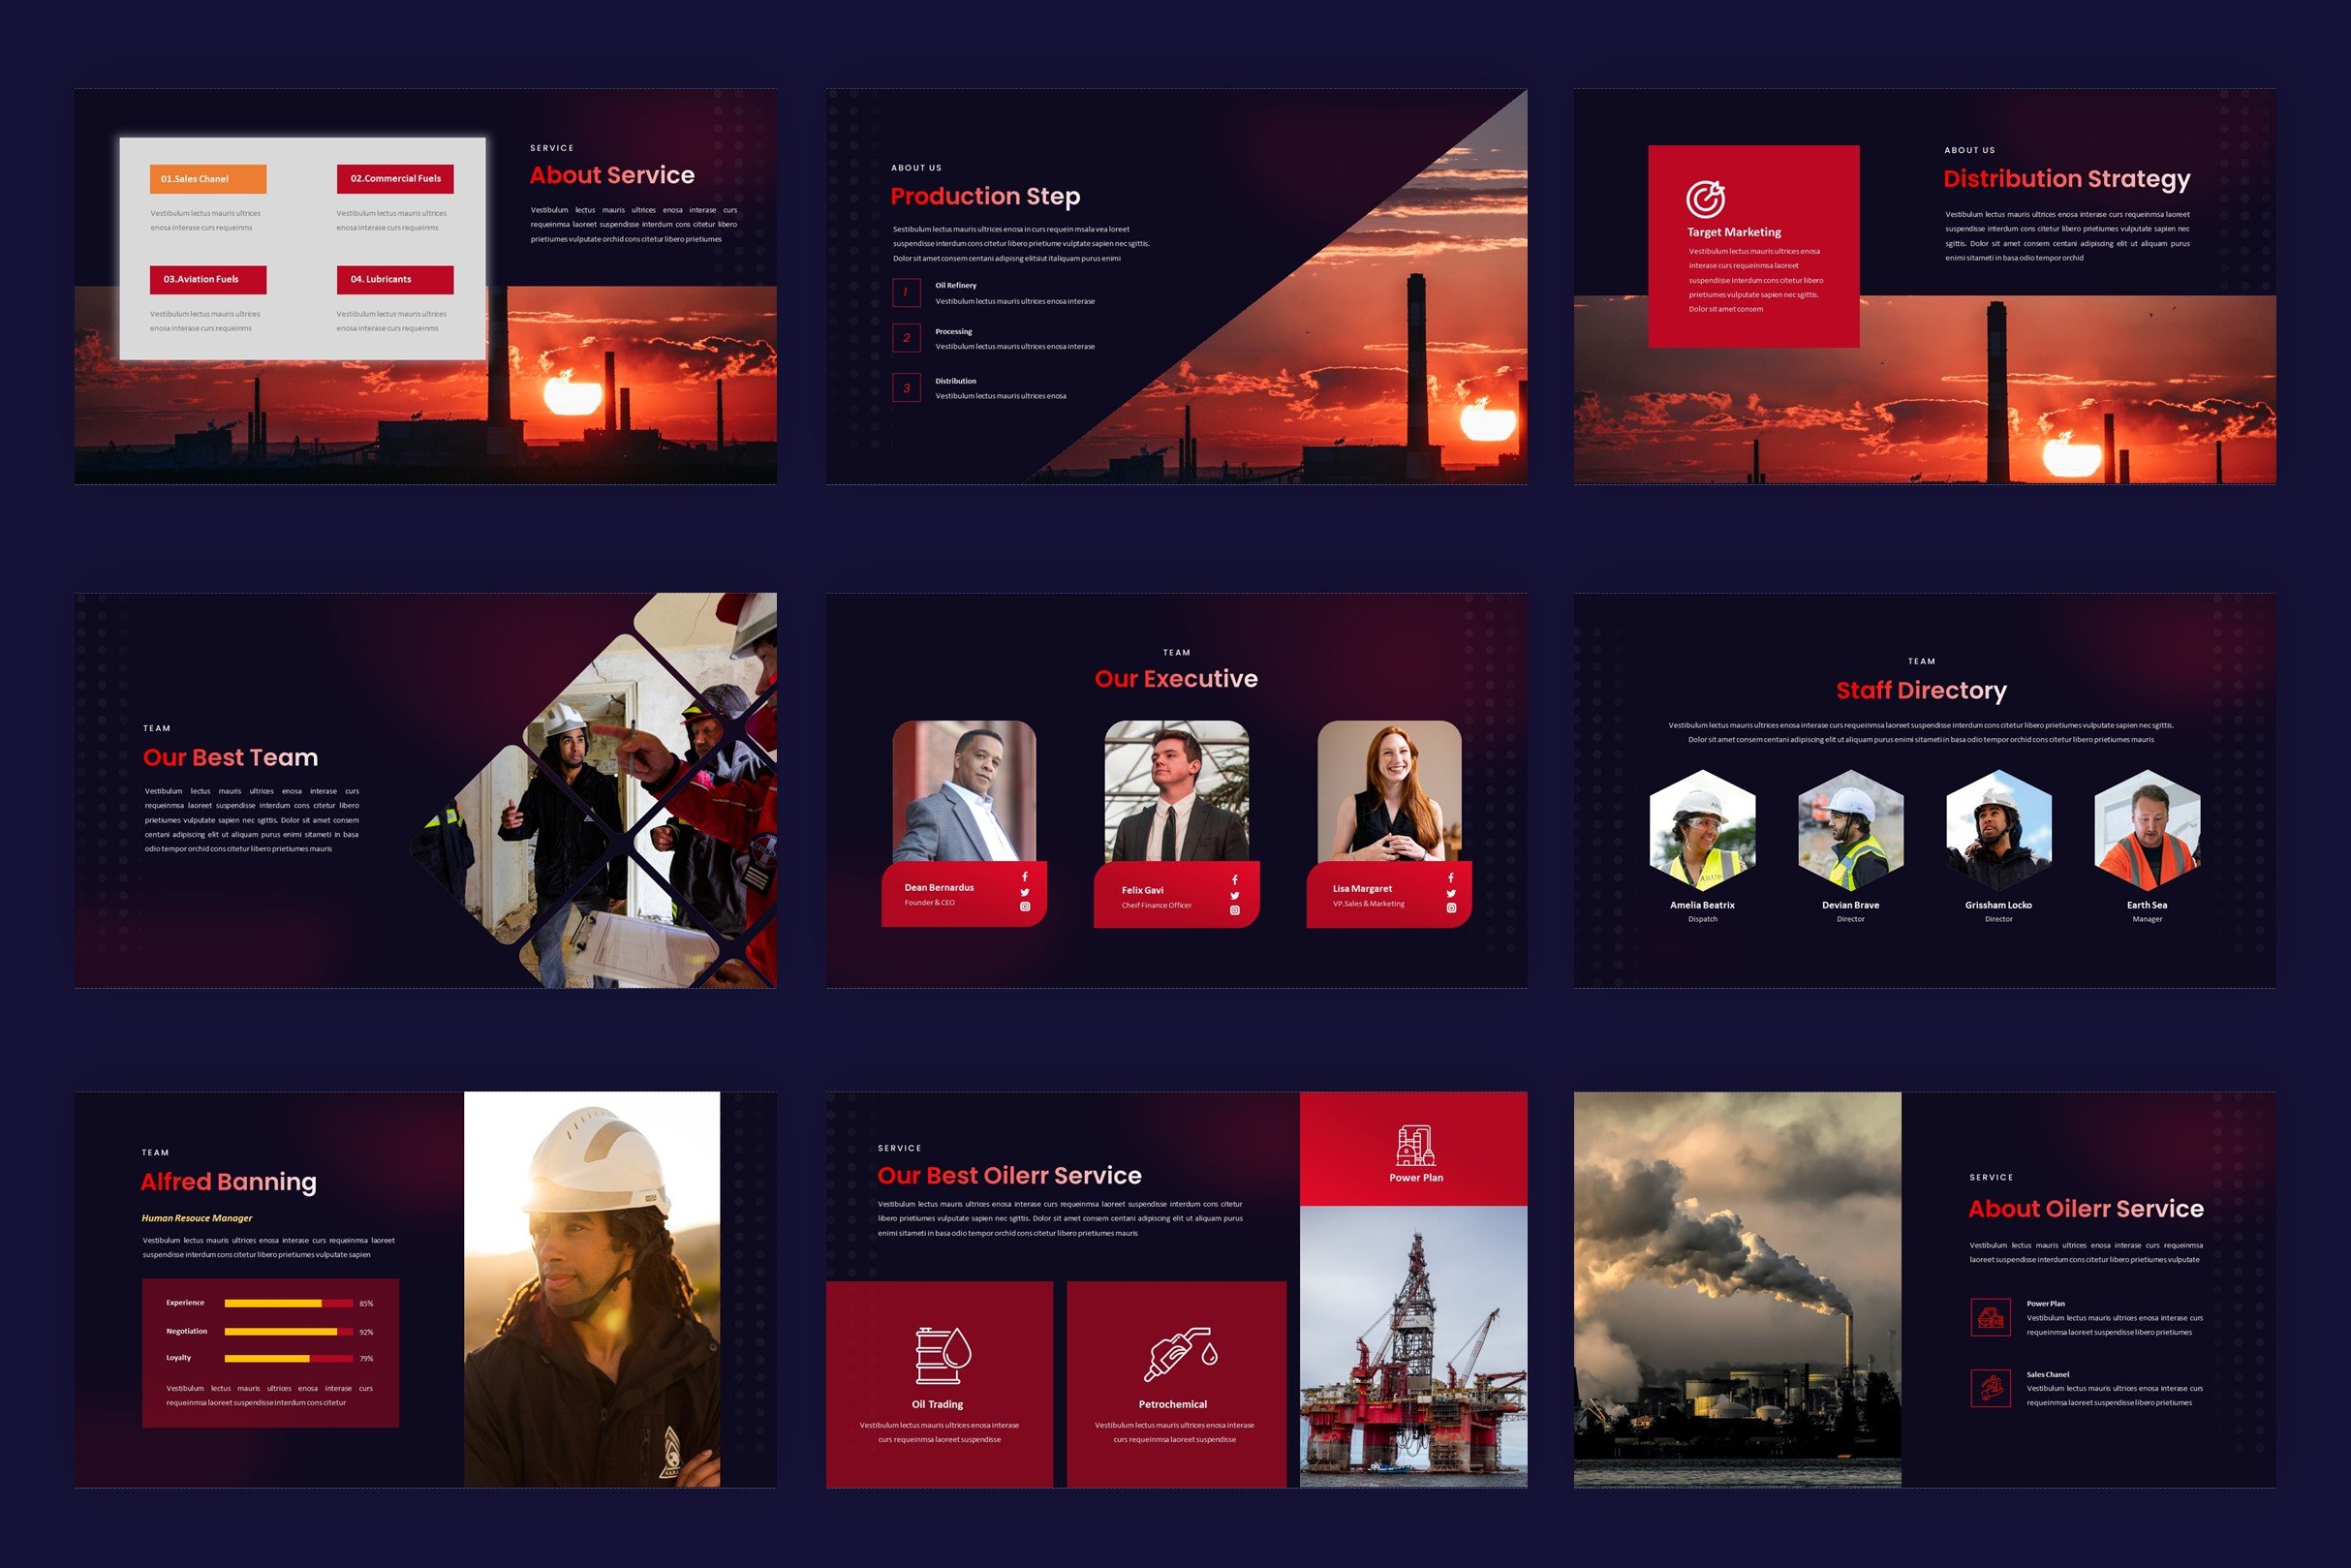 Dark purple template with red elements.